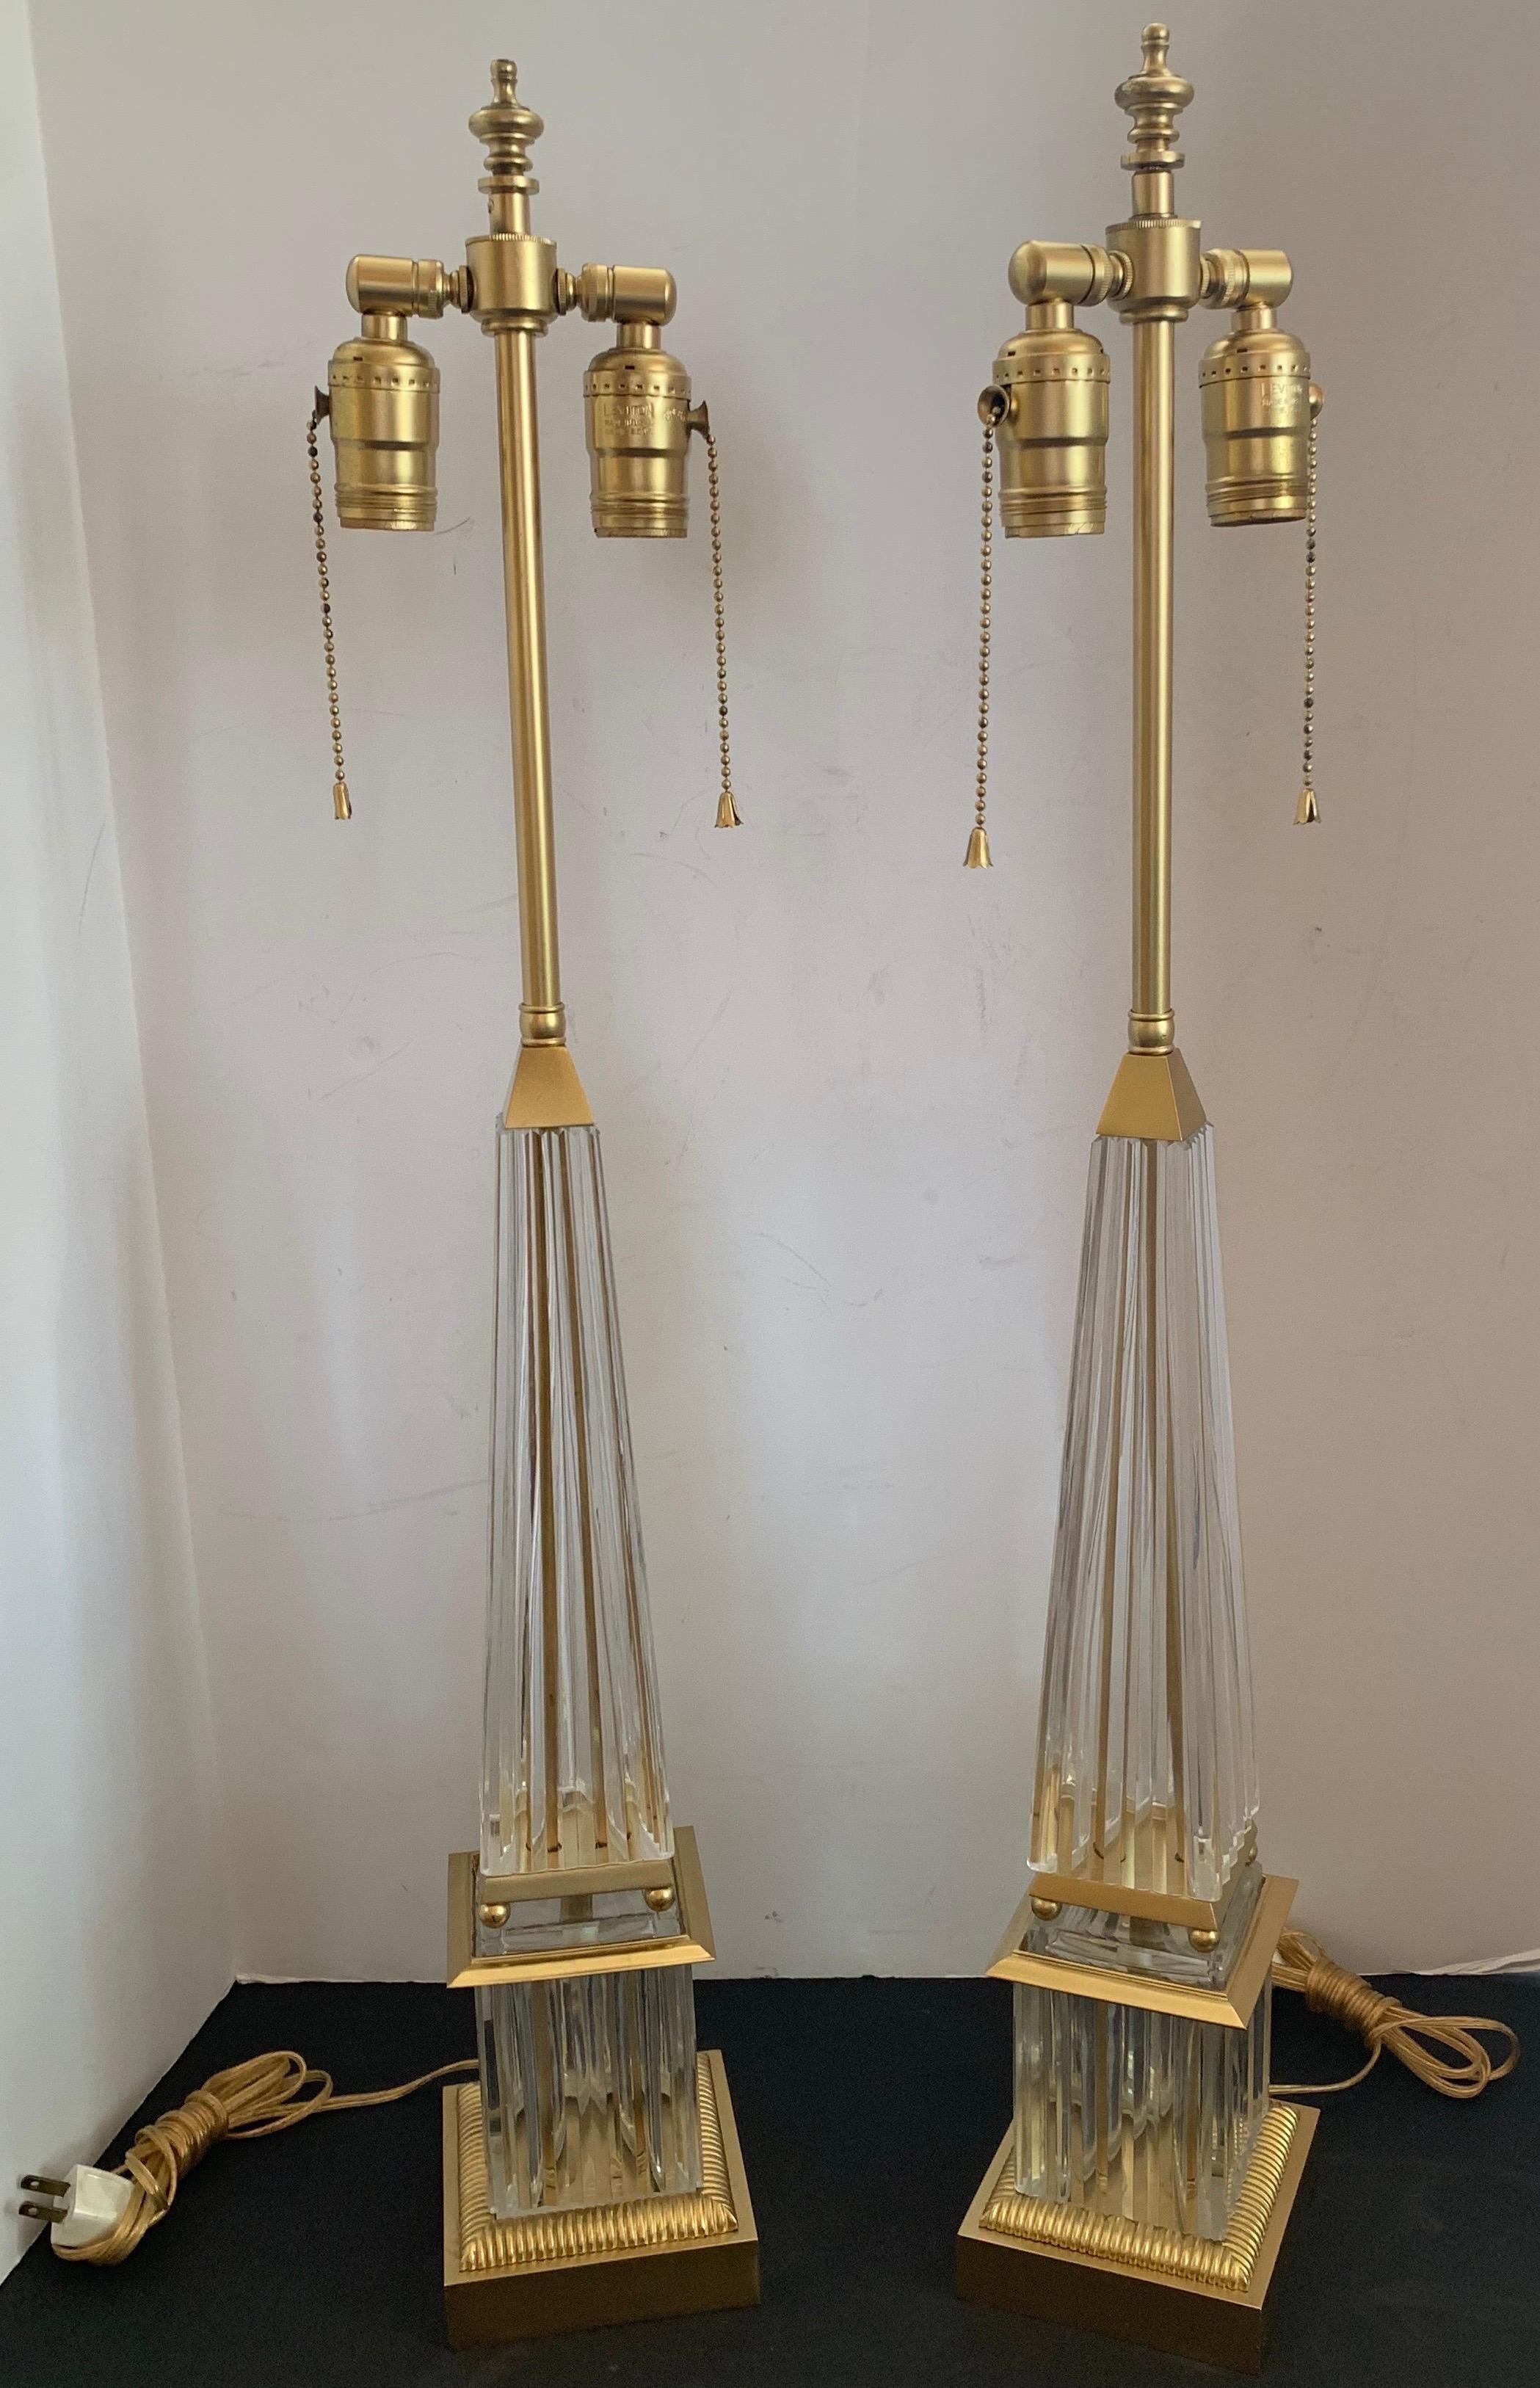 A wonderful pair of Mid-Century Modern art glass / crystal pyramid form brass / bronze obelisk lamps with 2 Edison lights each.